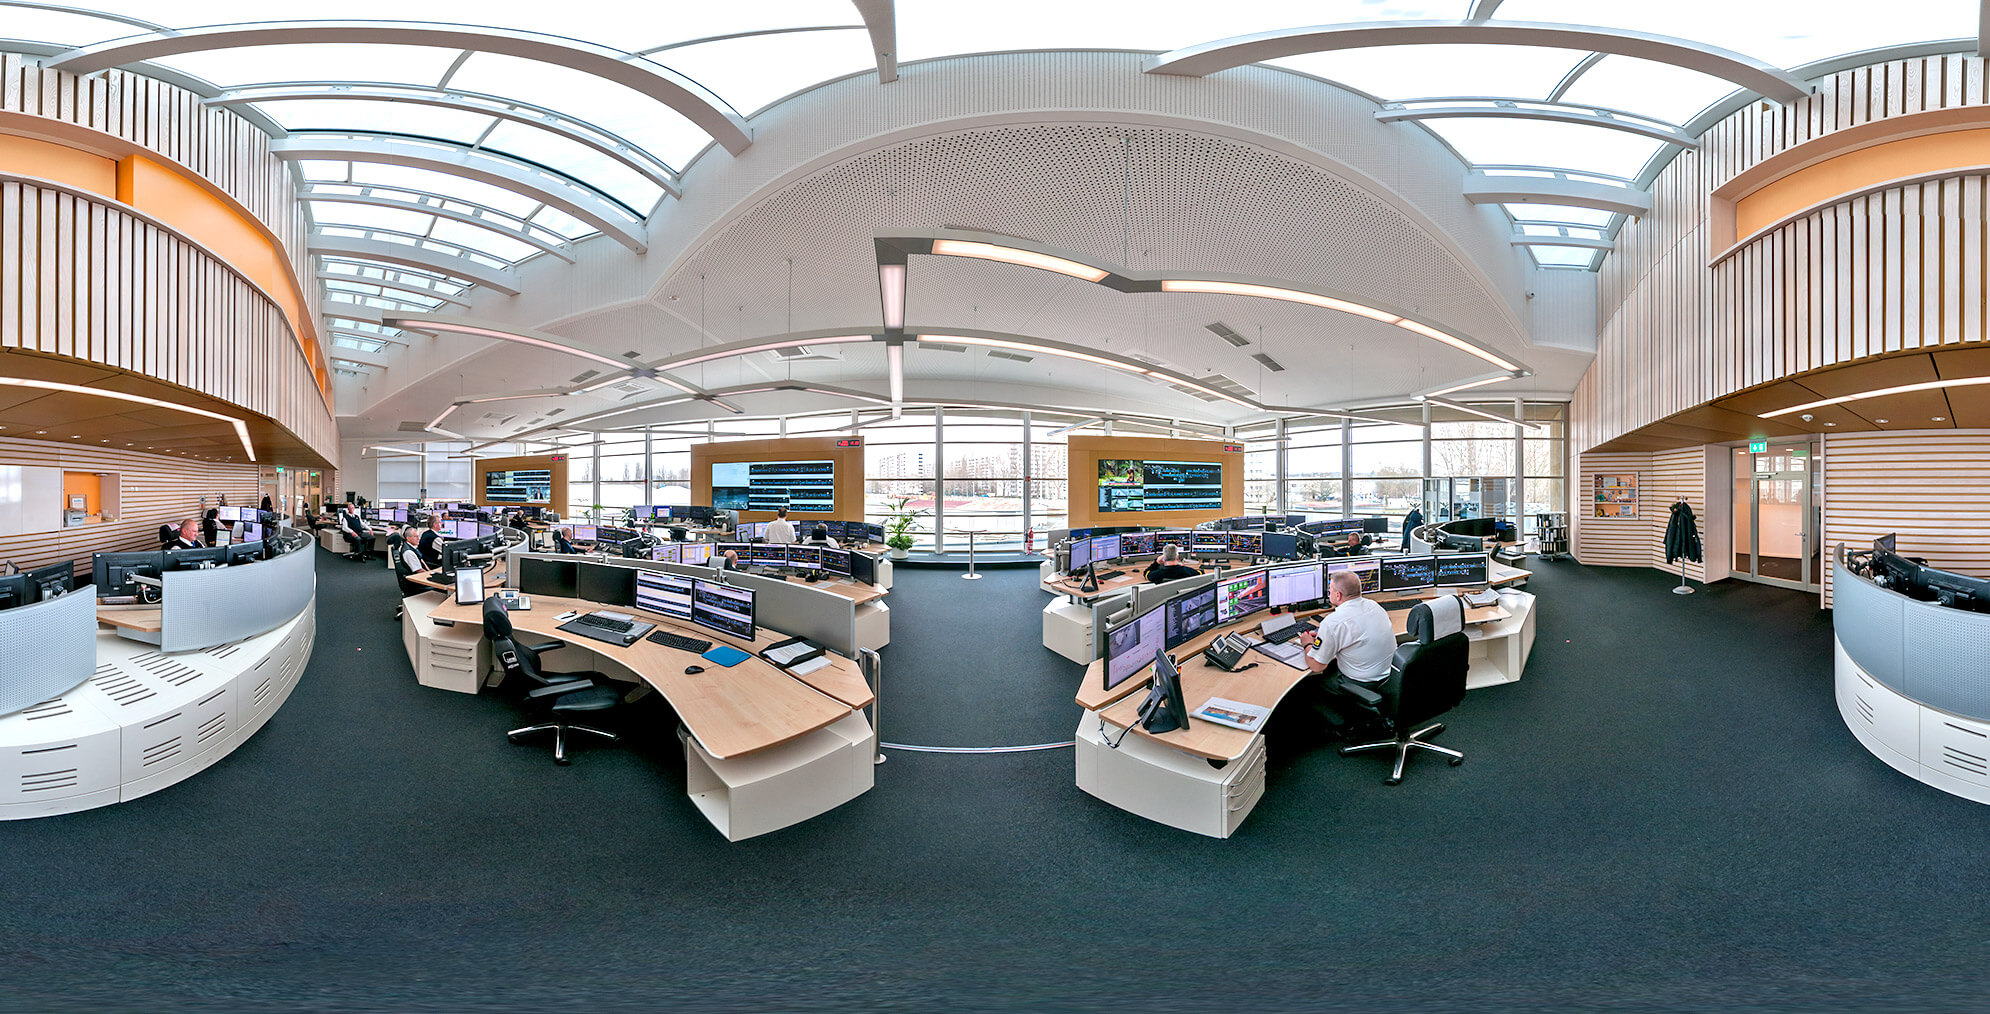 Virtual 360° tour of the BVG operations control center in Berlin